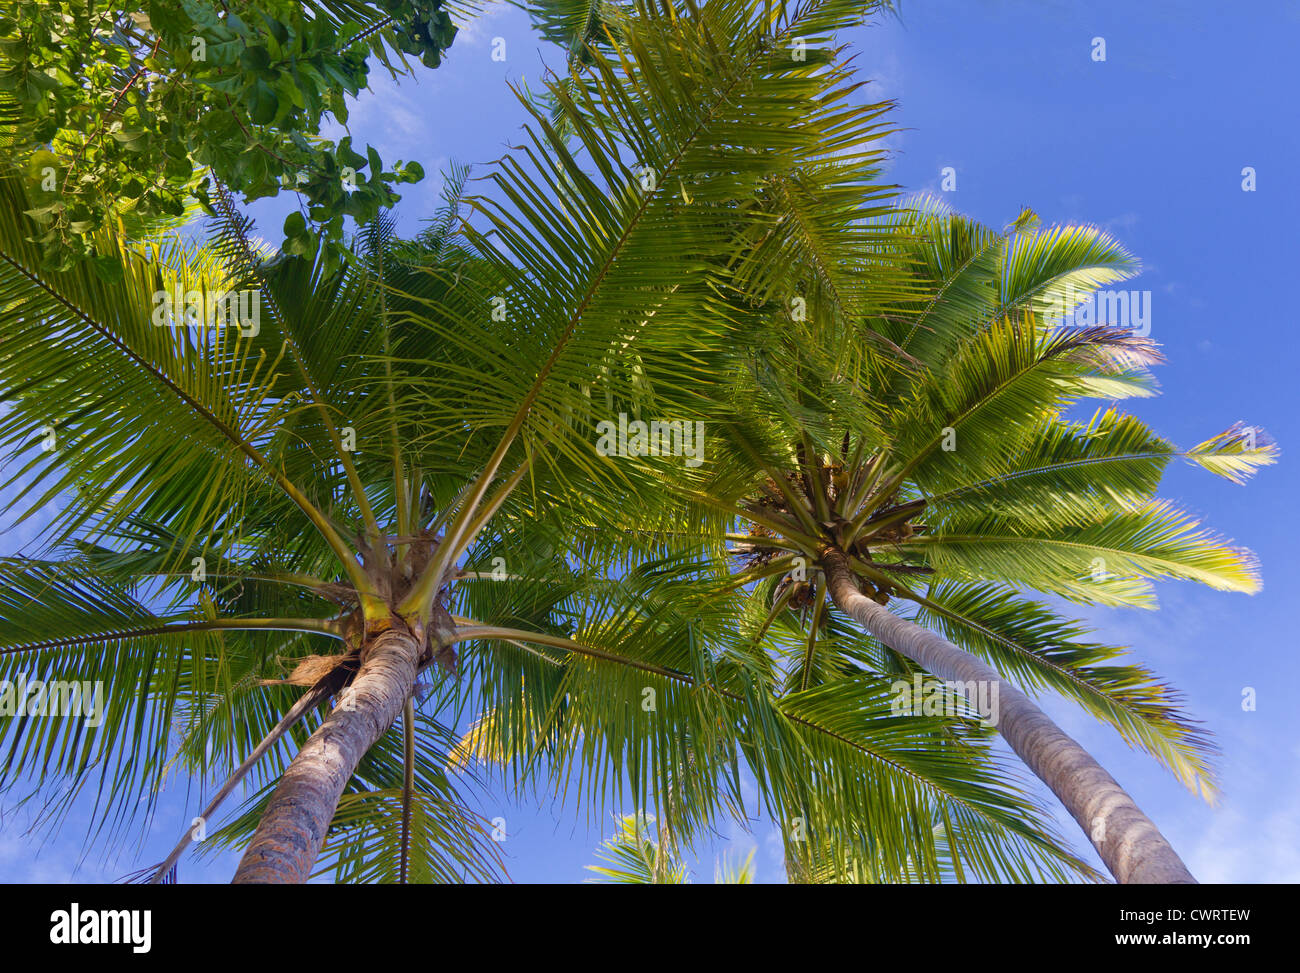 view from underneath the palm trees Stock Photo